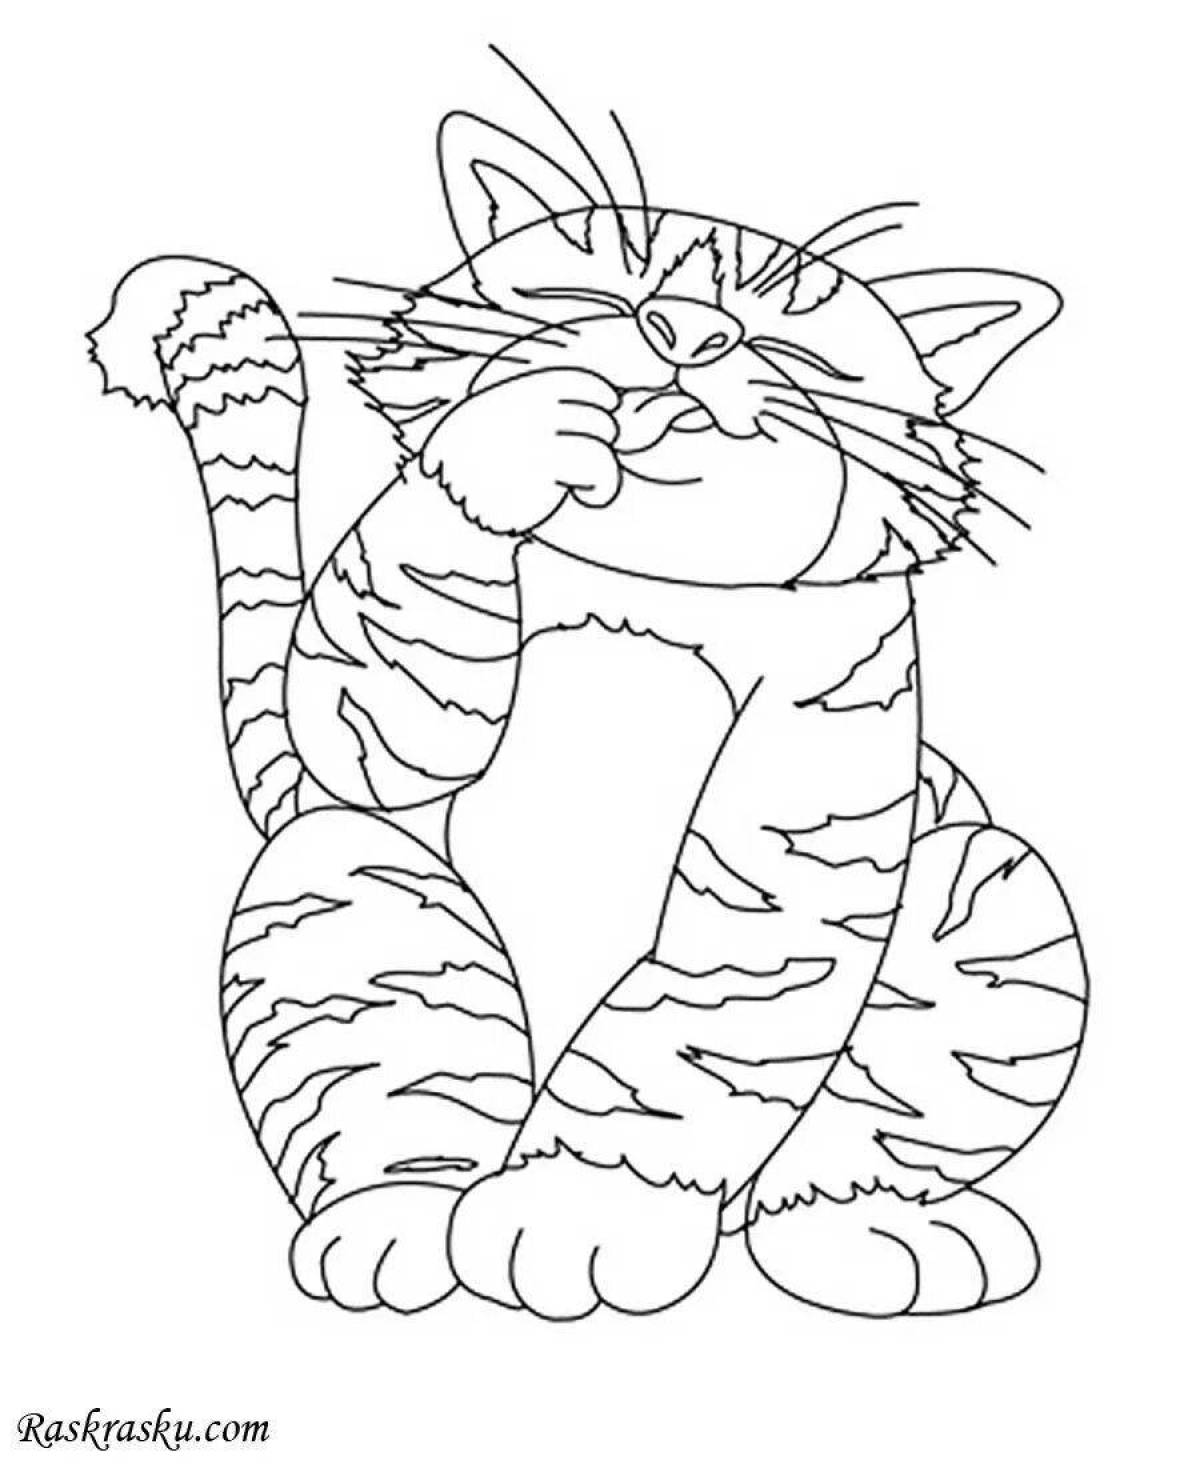 Coloring book of a funny tabby kitten